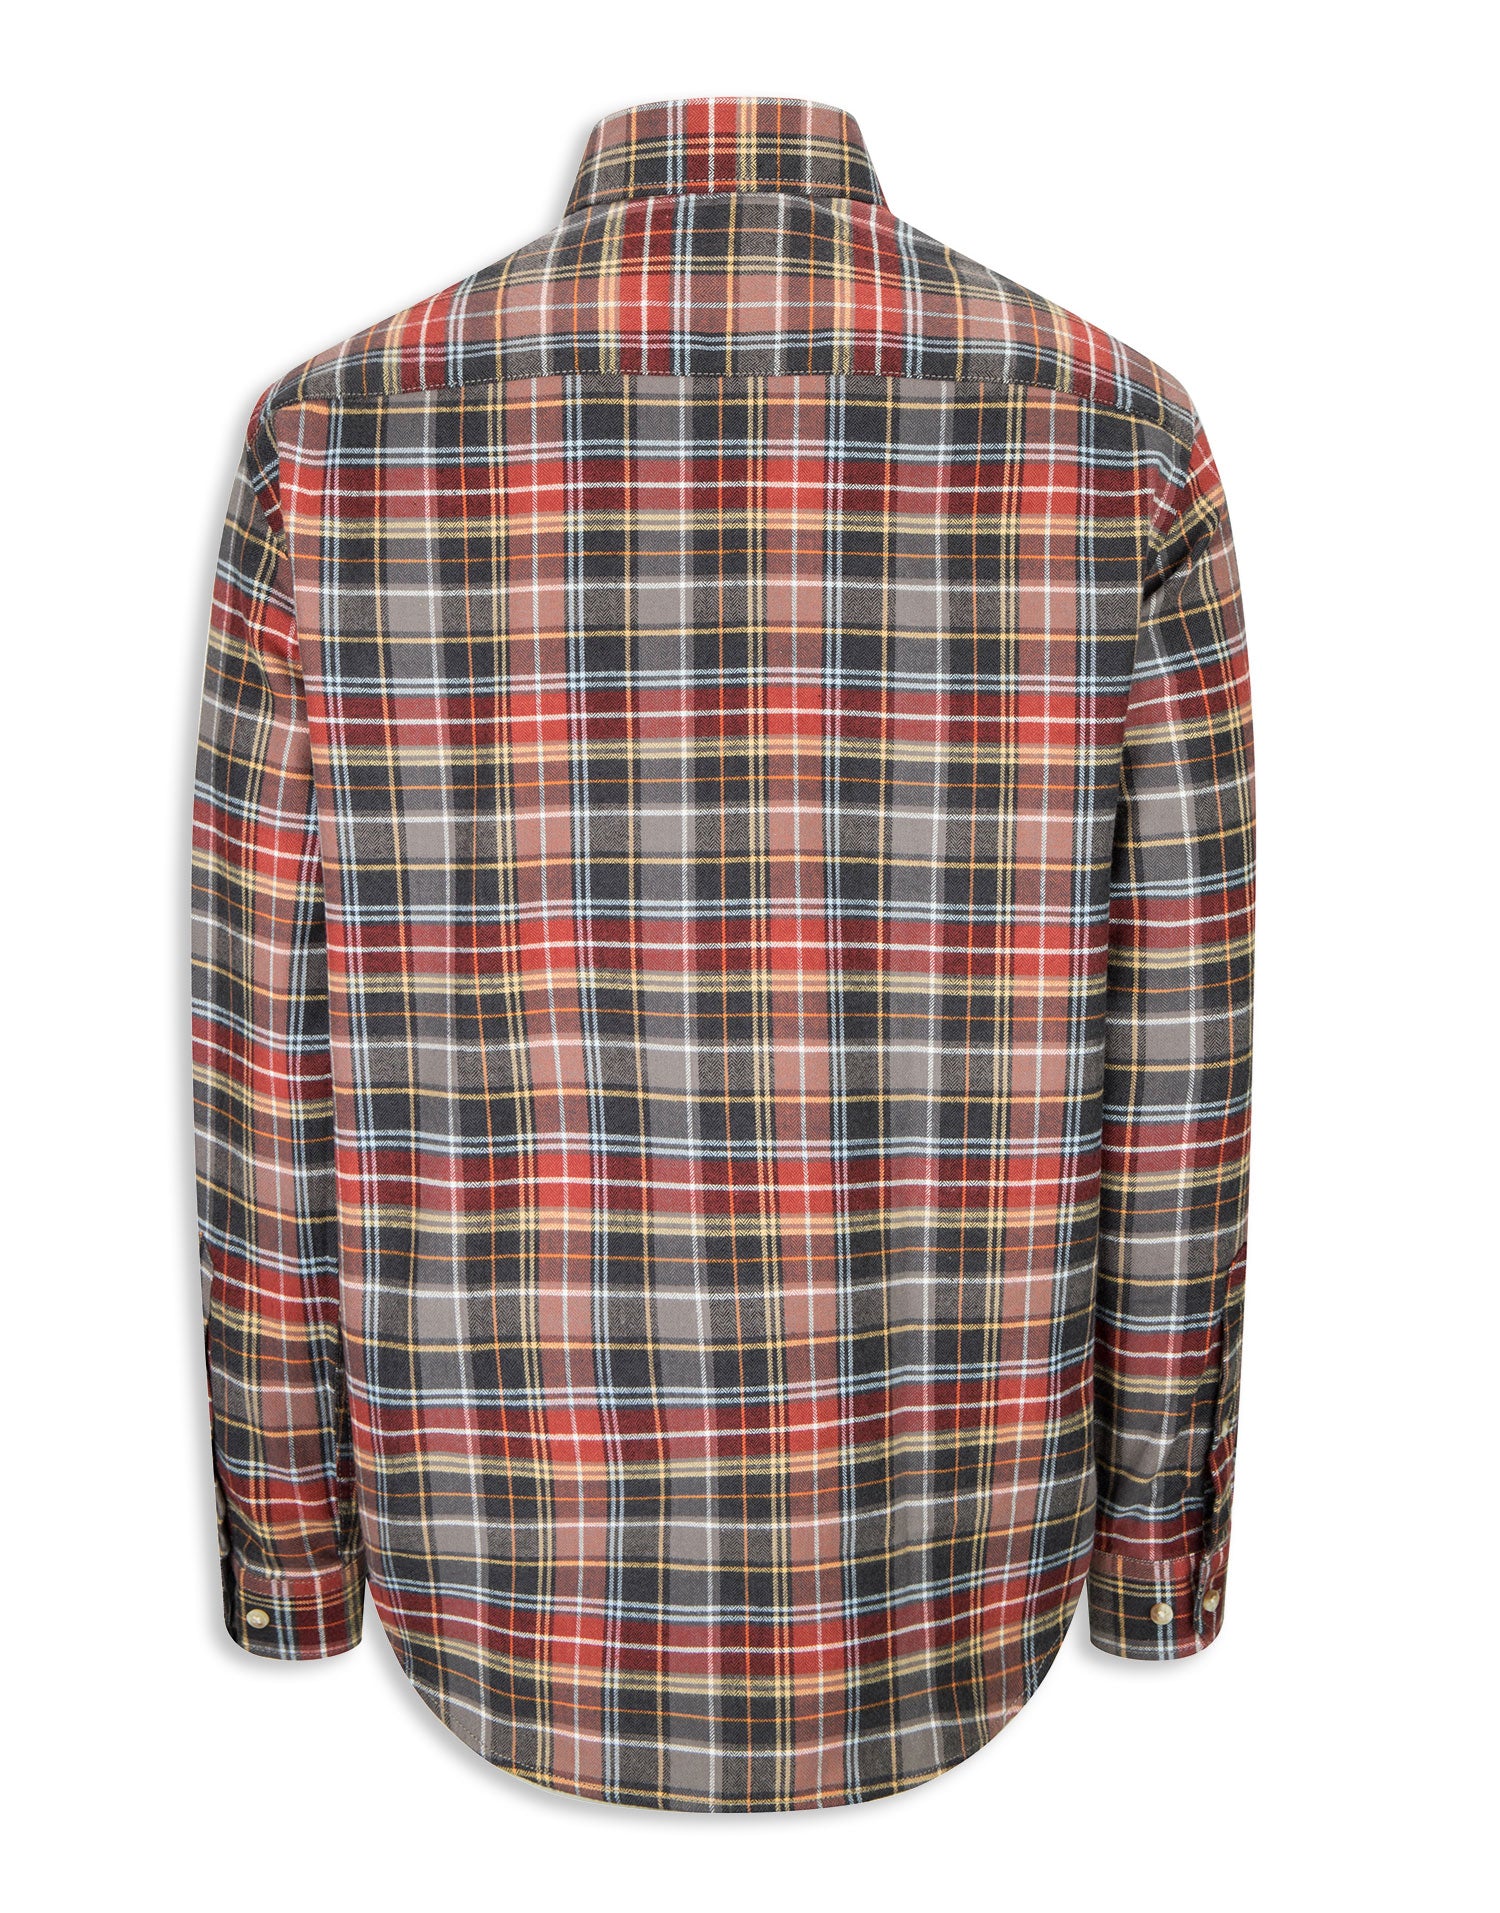 Chestnut Hoggs of Fife Pitlochry Flannel Check Shirt 